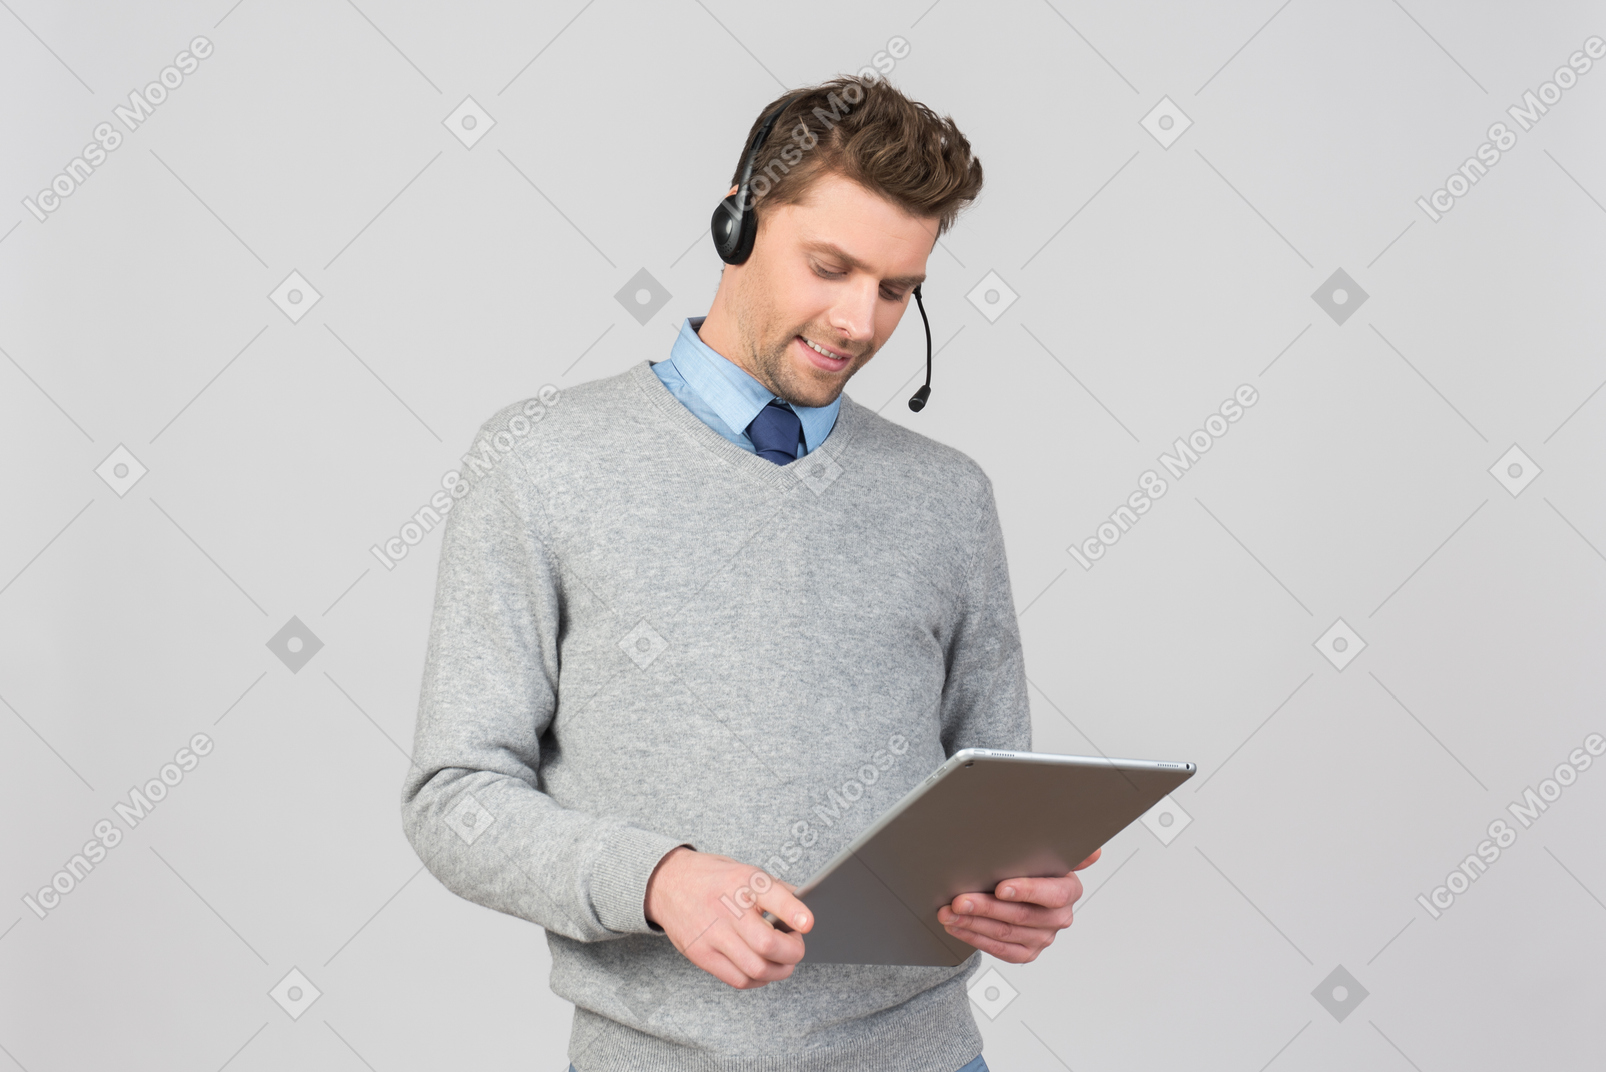 Call center agent looking on tablet